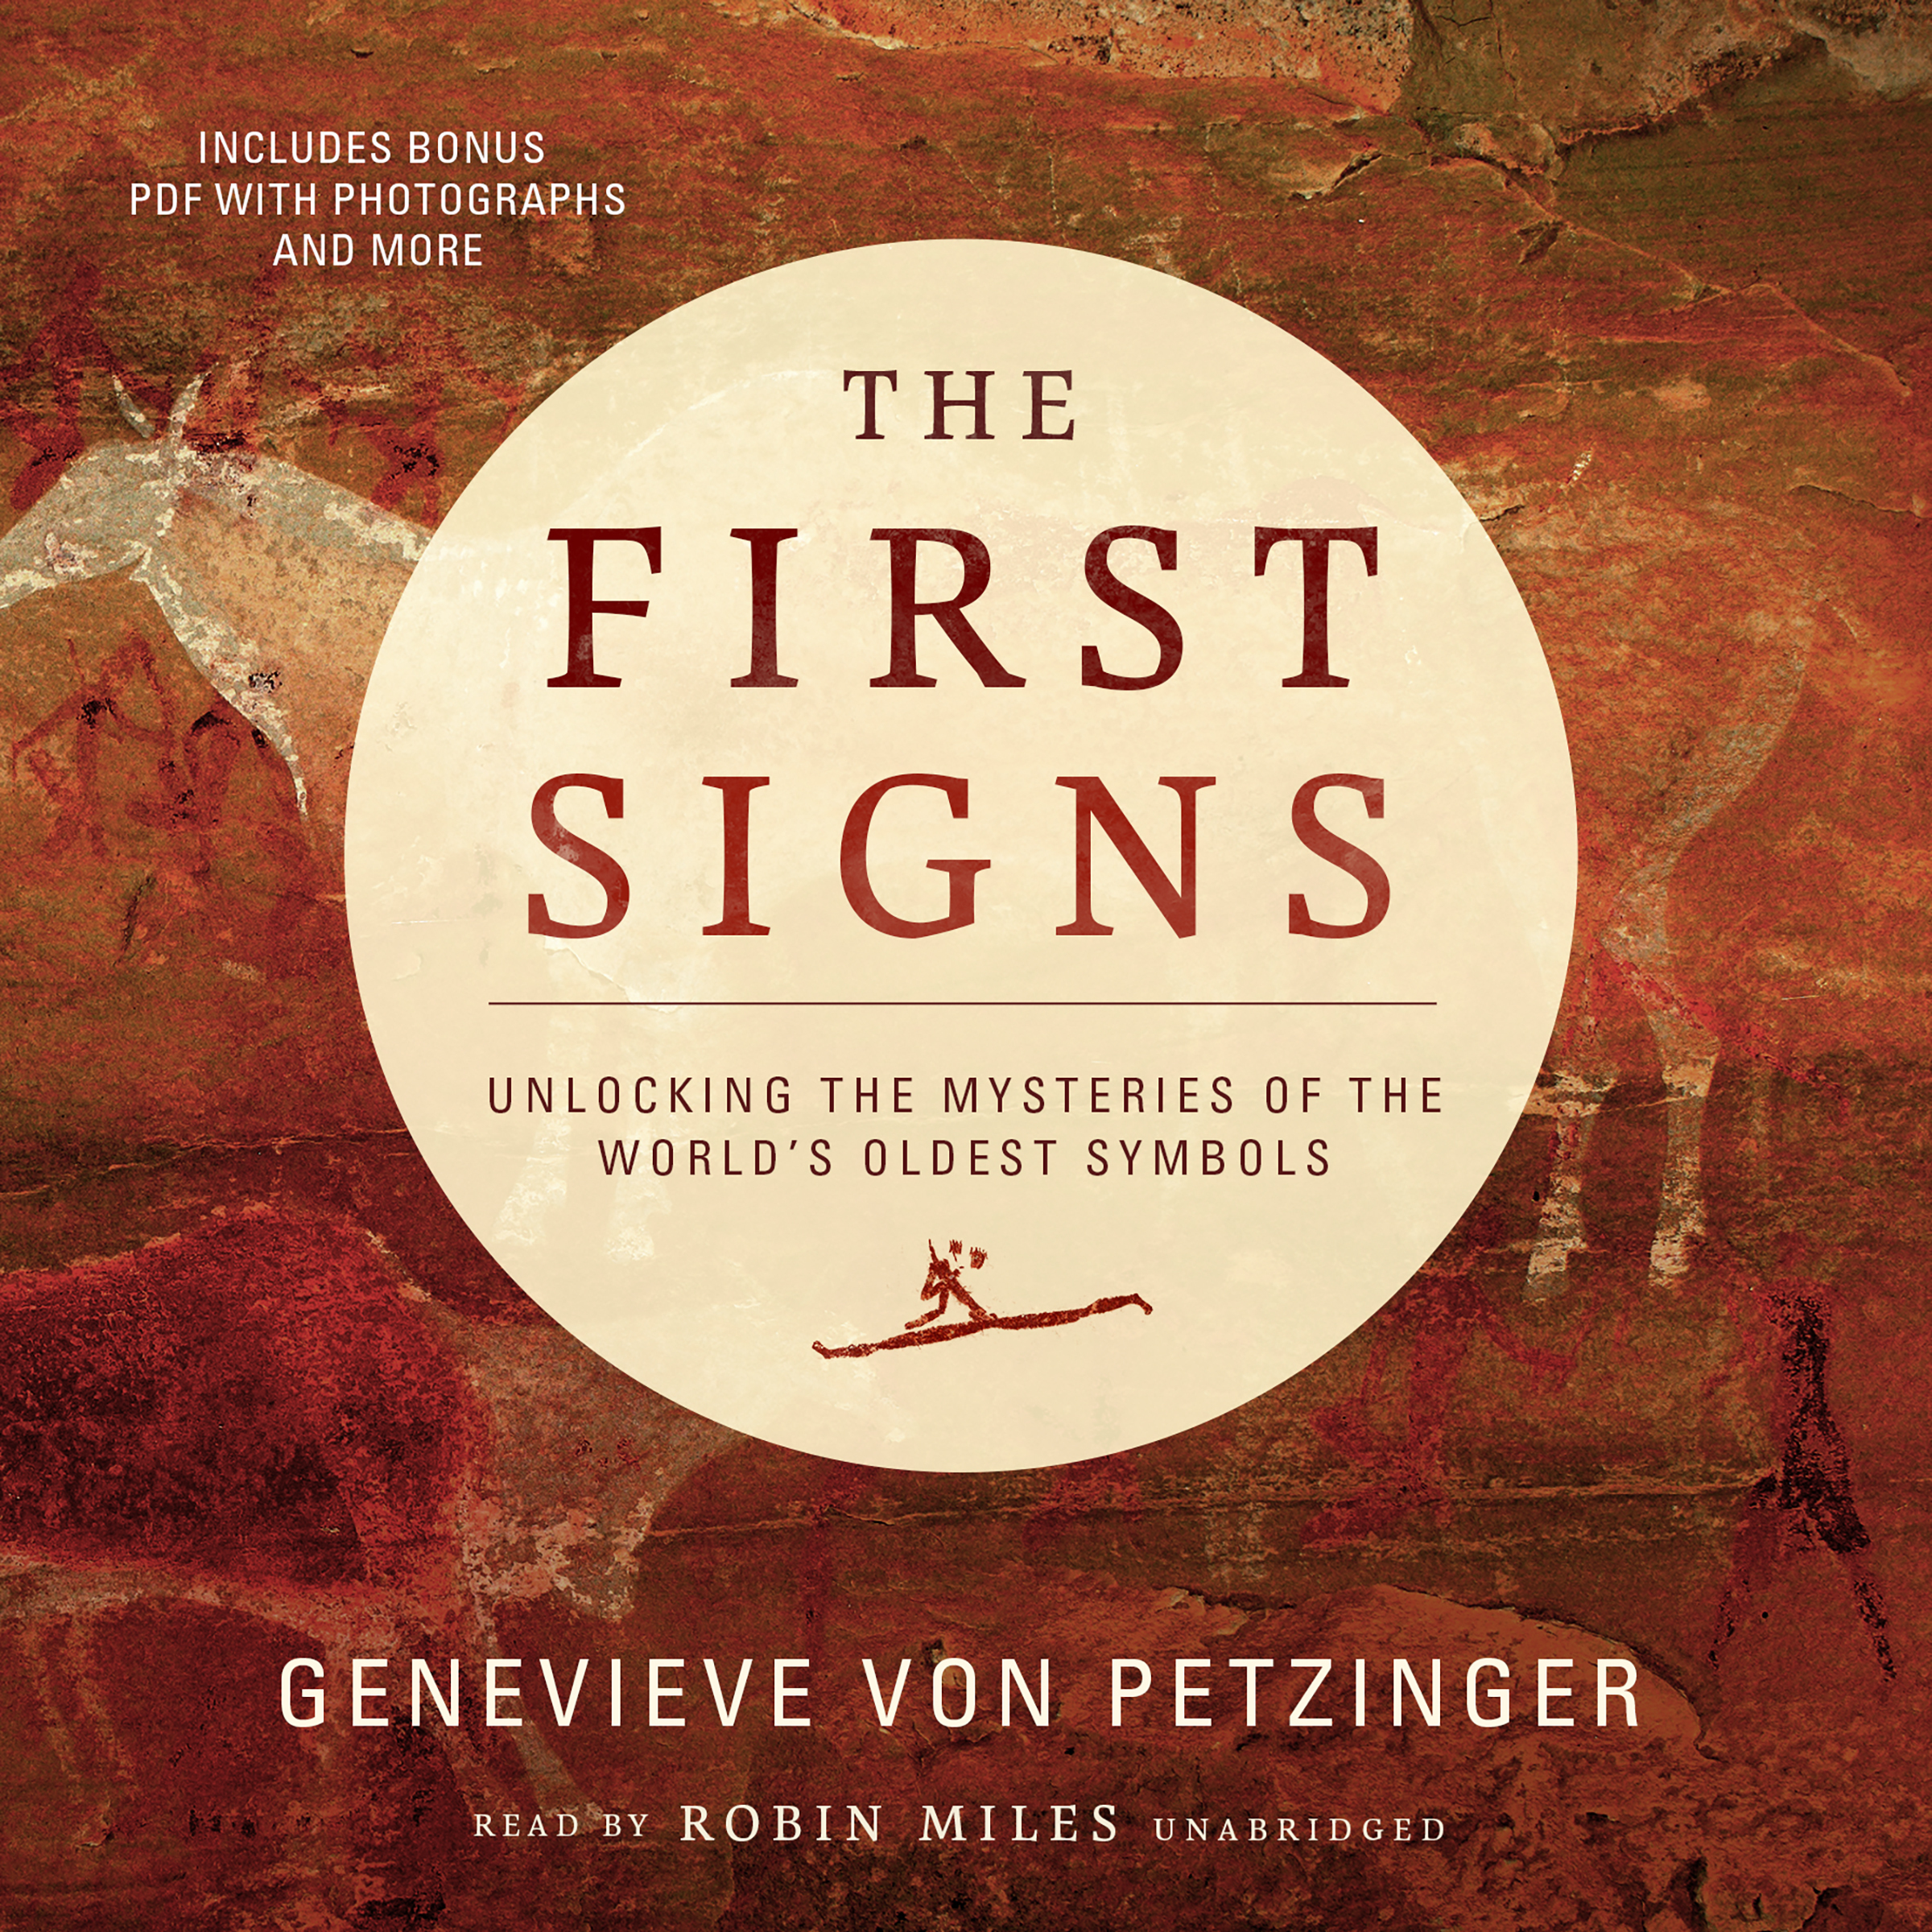 The First Signs: Unlocking the mysteries of the world's oldest symbols by Genevieve von Petzinger